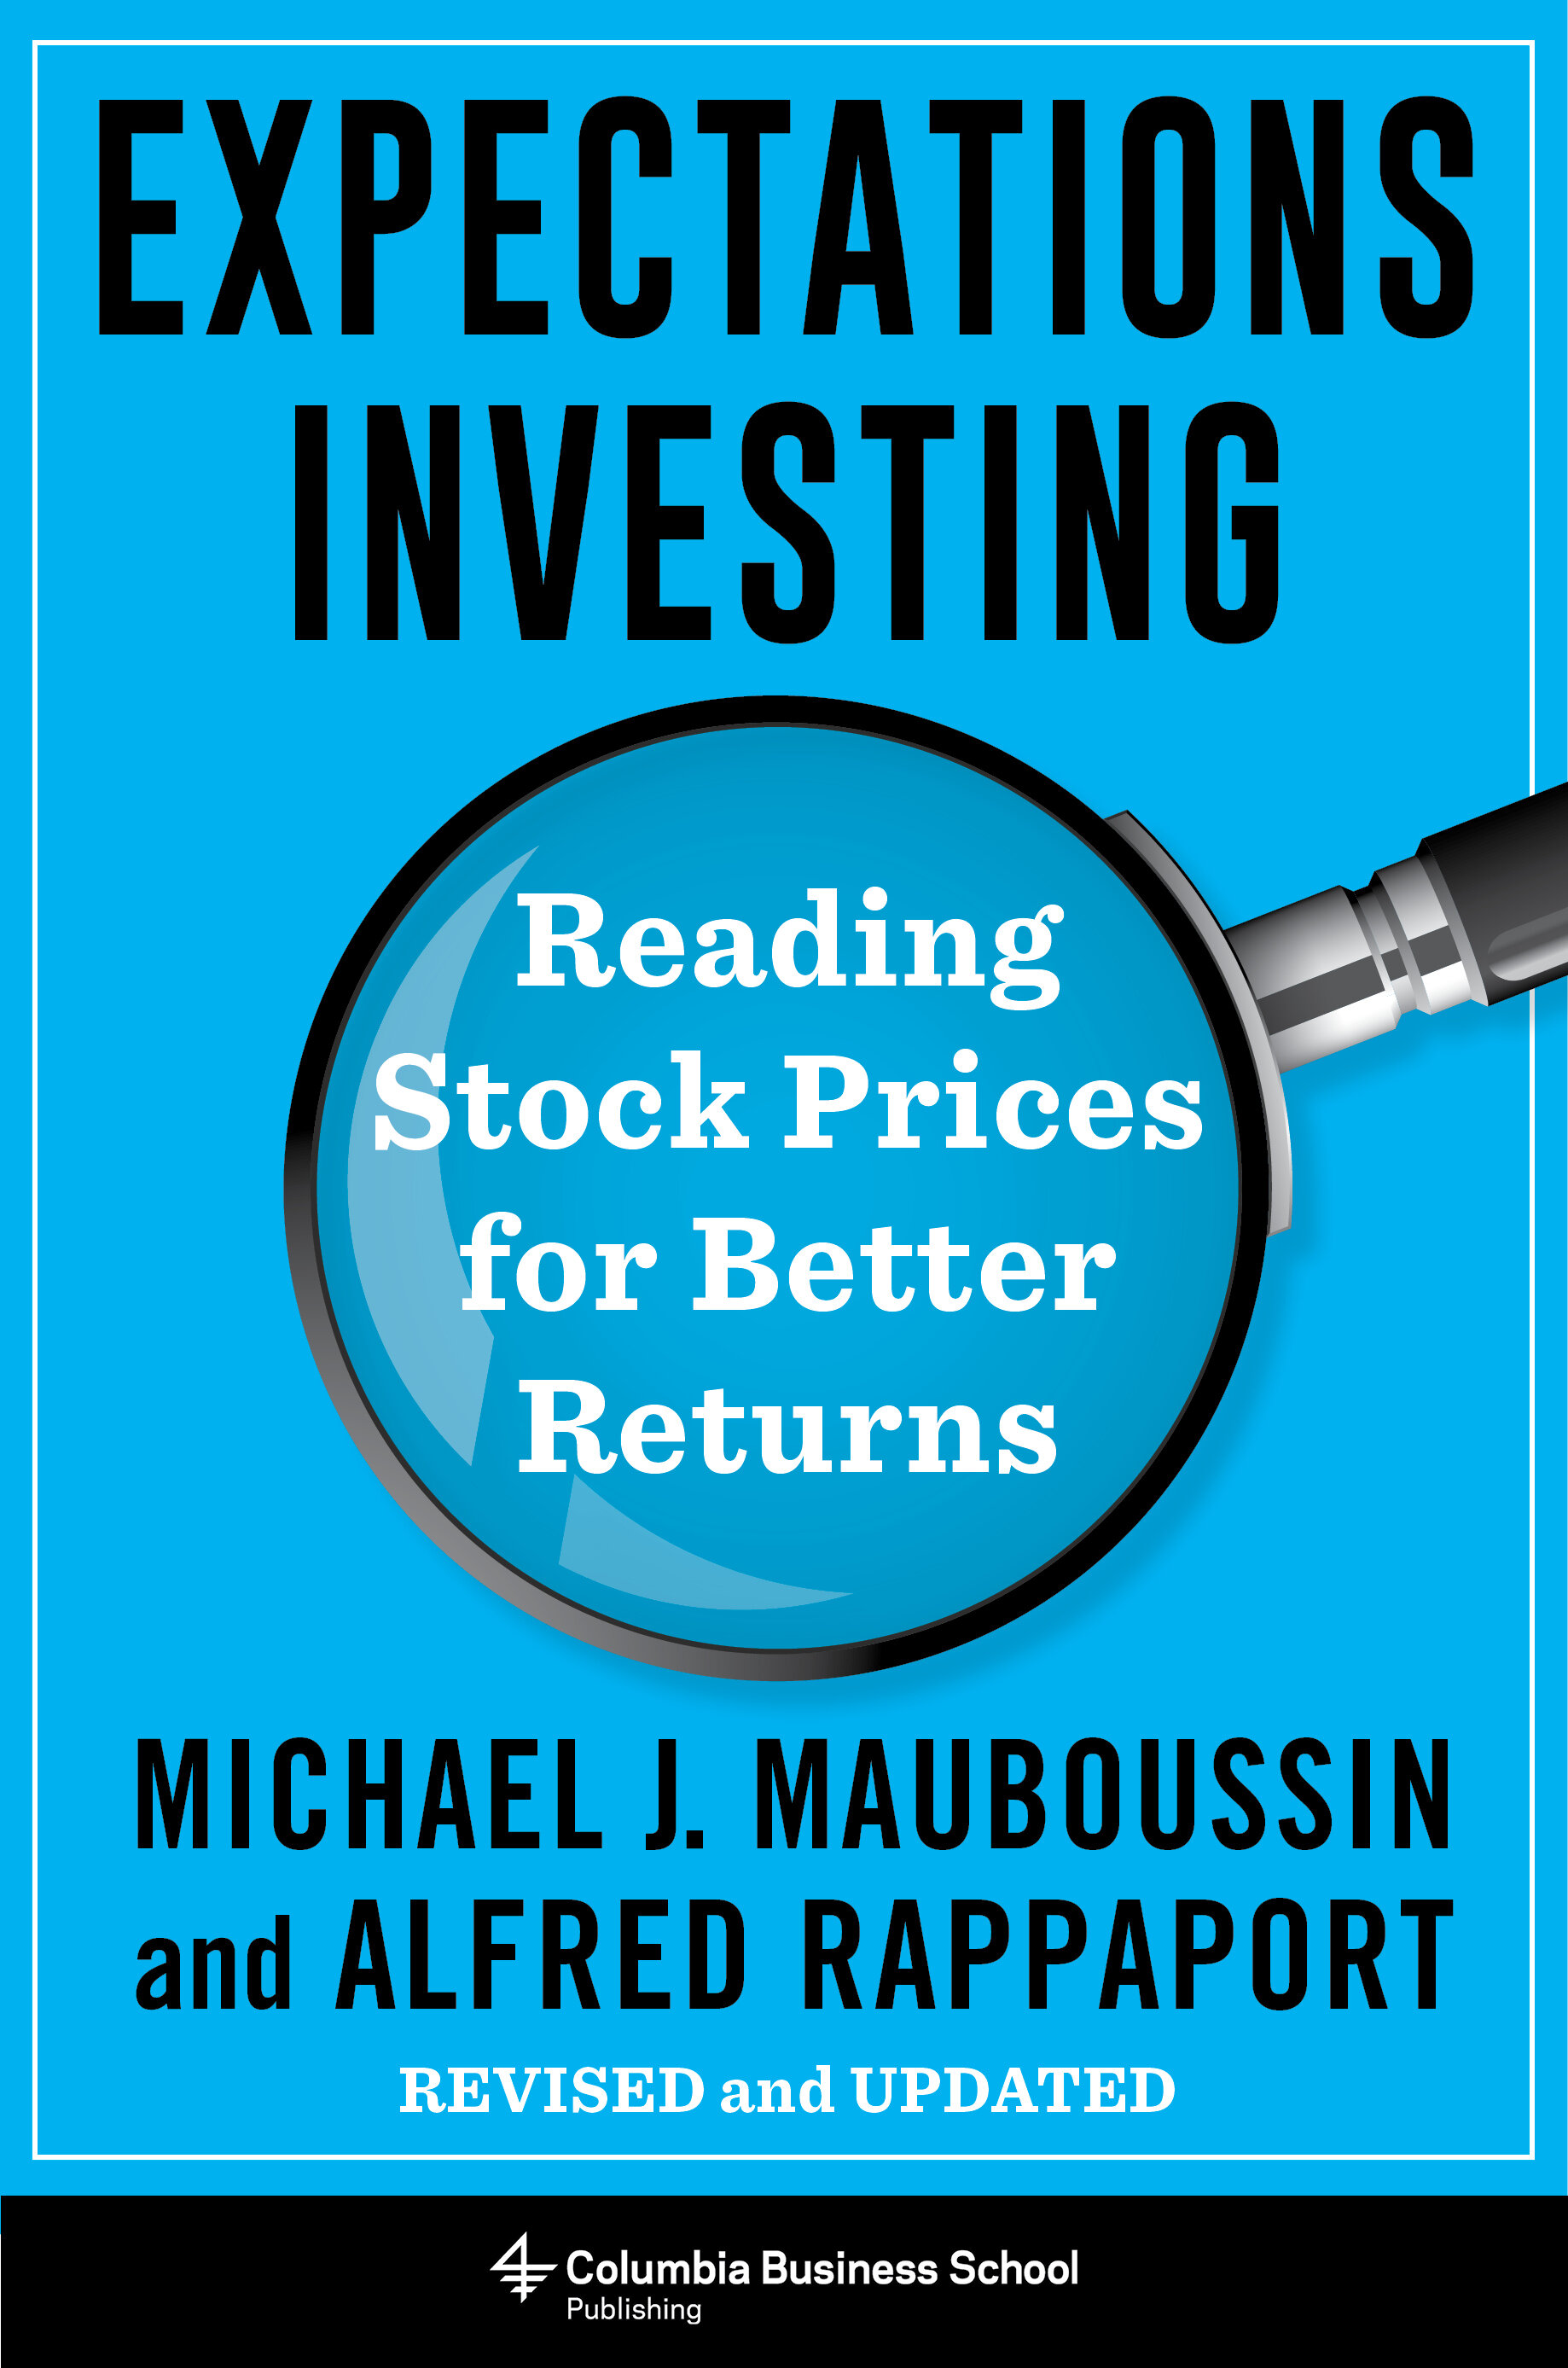 michael mauboussin expectations investing tutorial